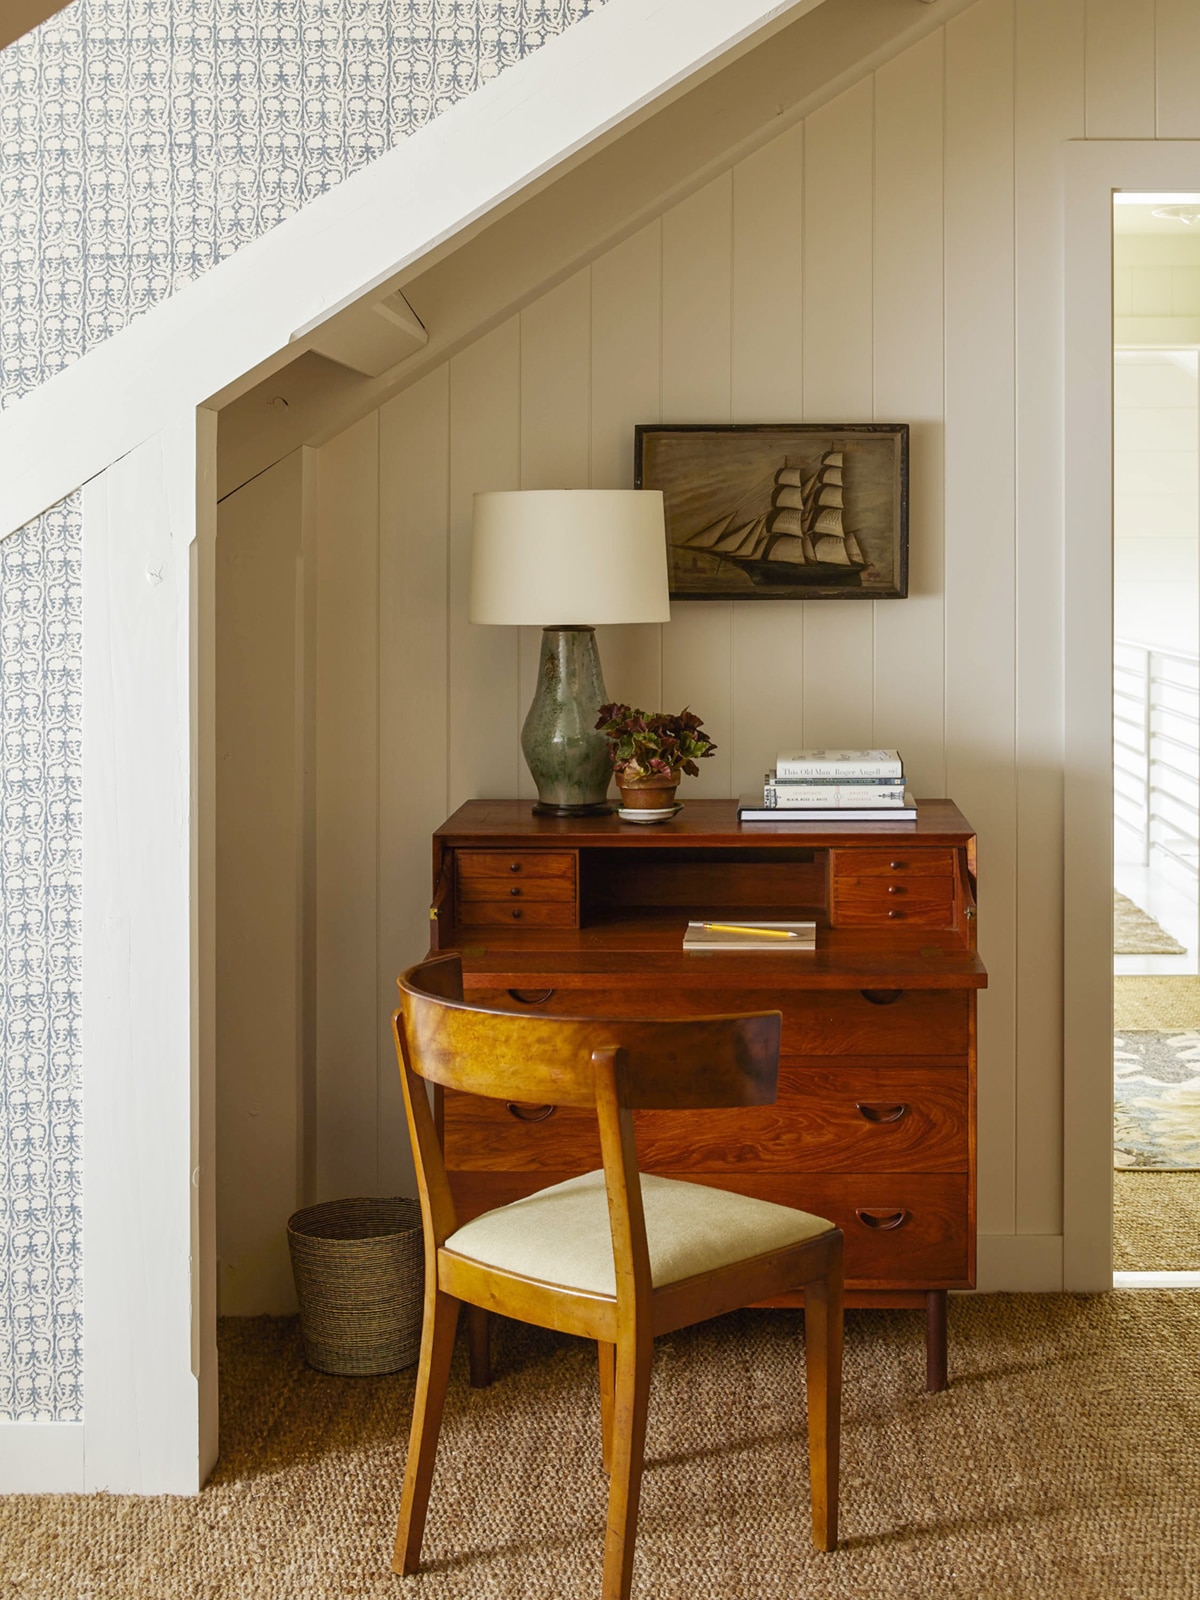 antique desk in an attic nook | seaside cottage house tour on coco kelley